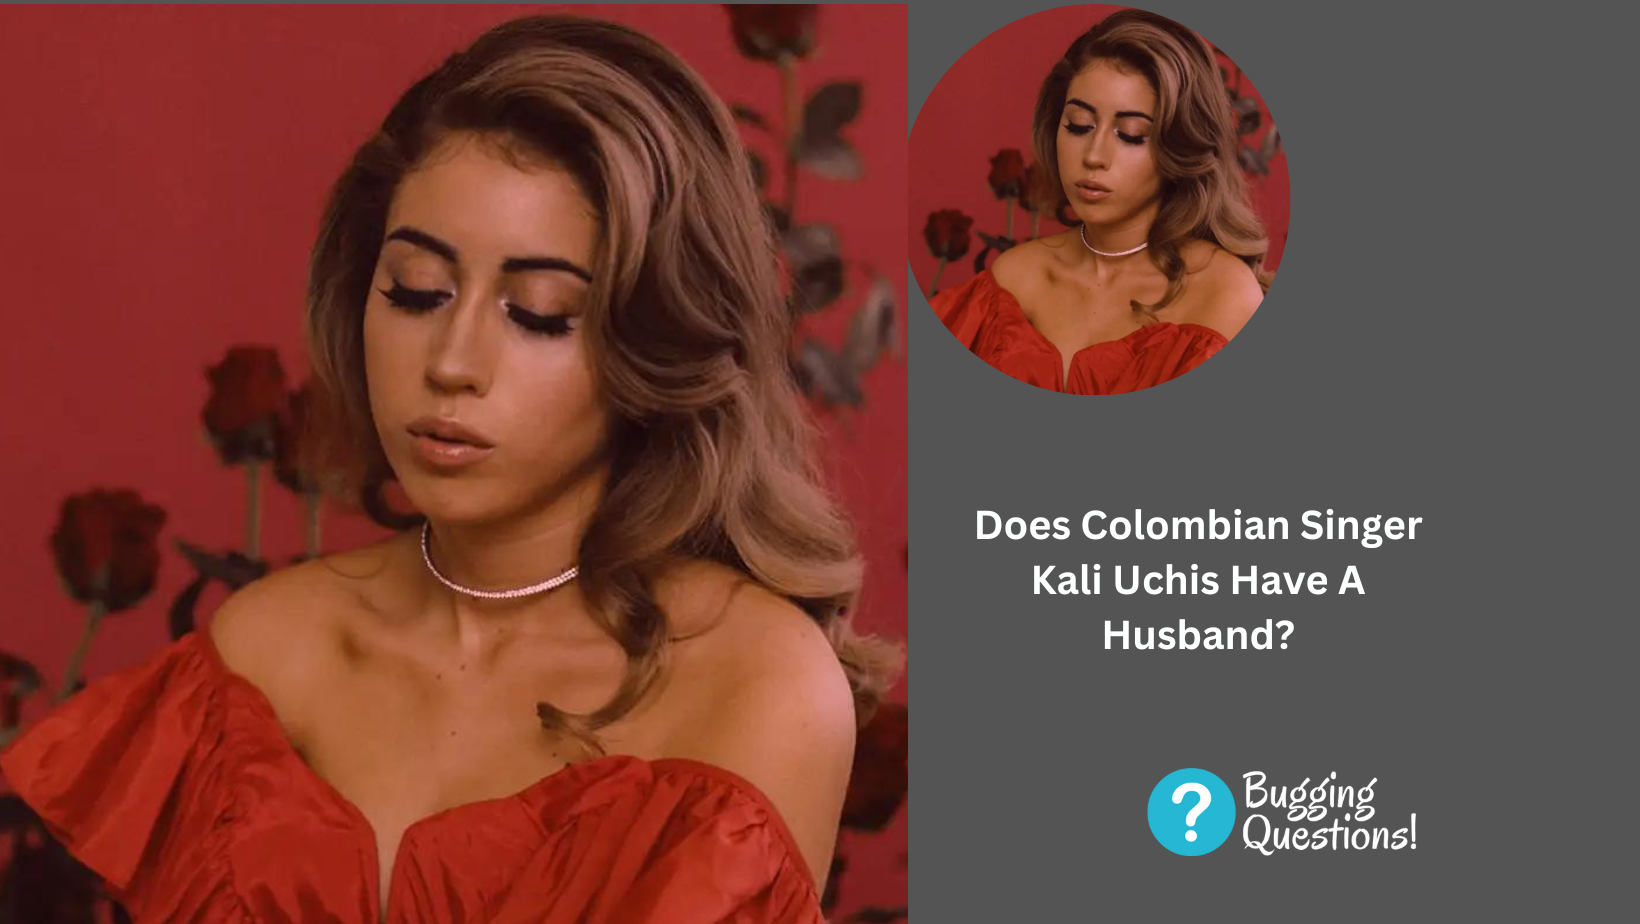 Does Colombian Singer Kali Uchis Have A Husband?